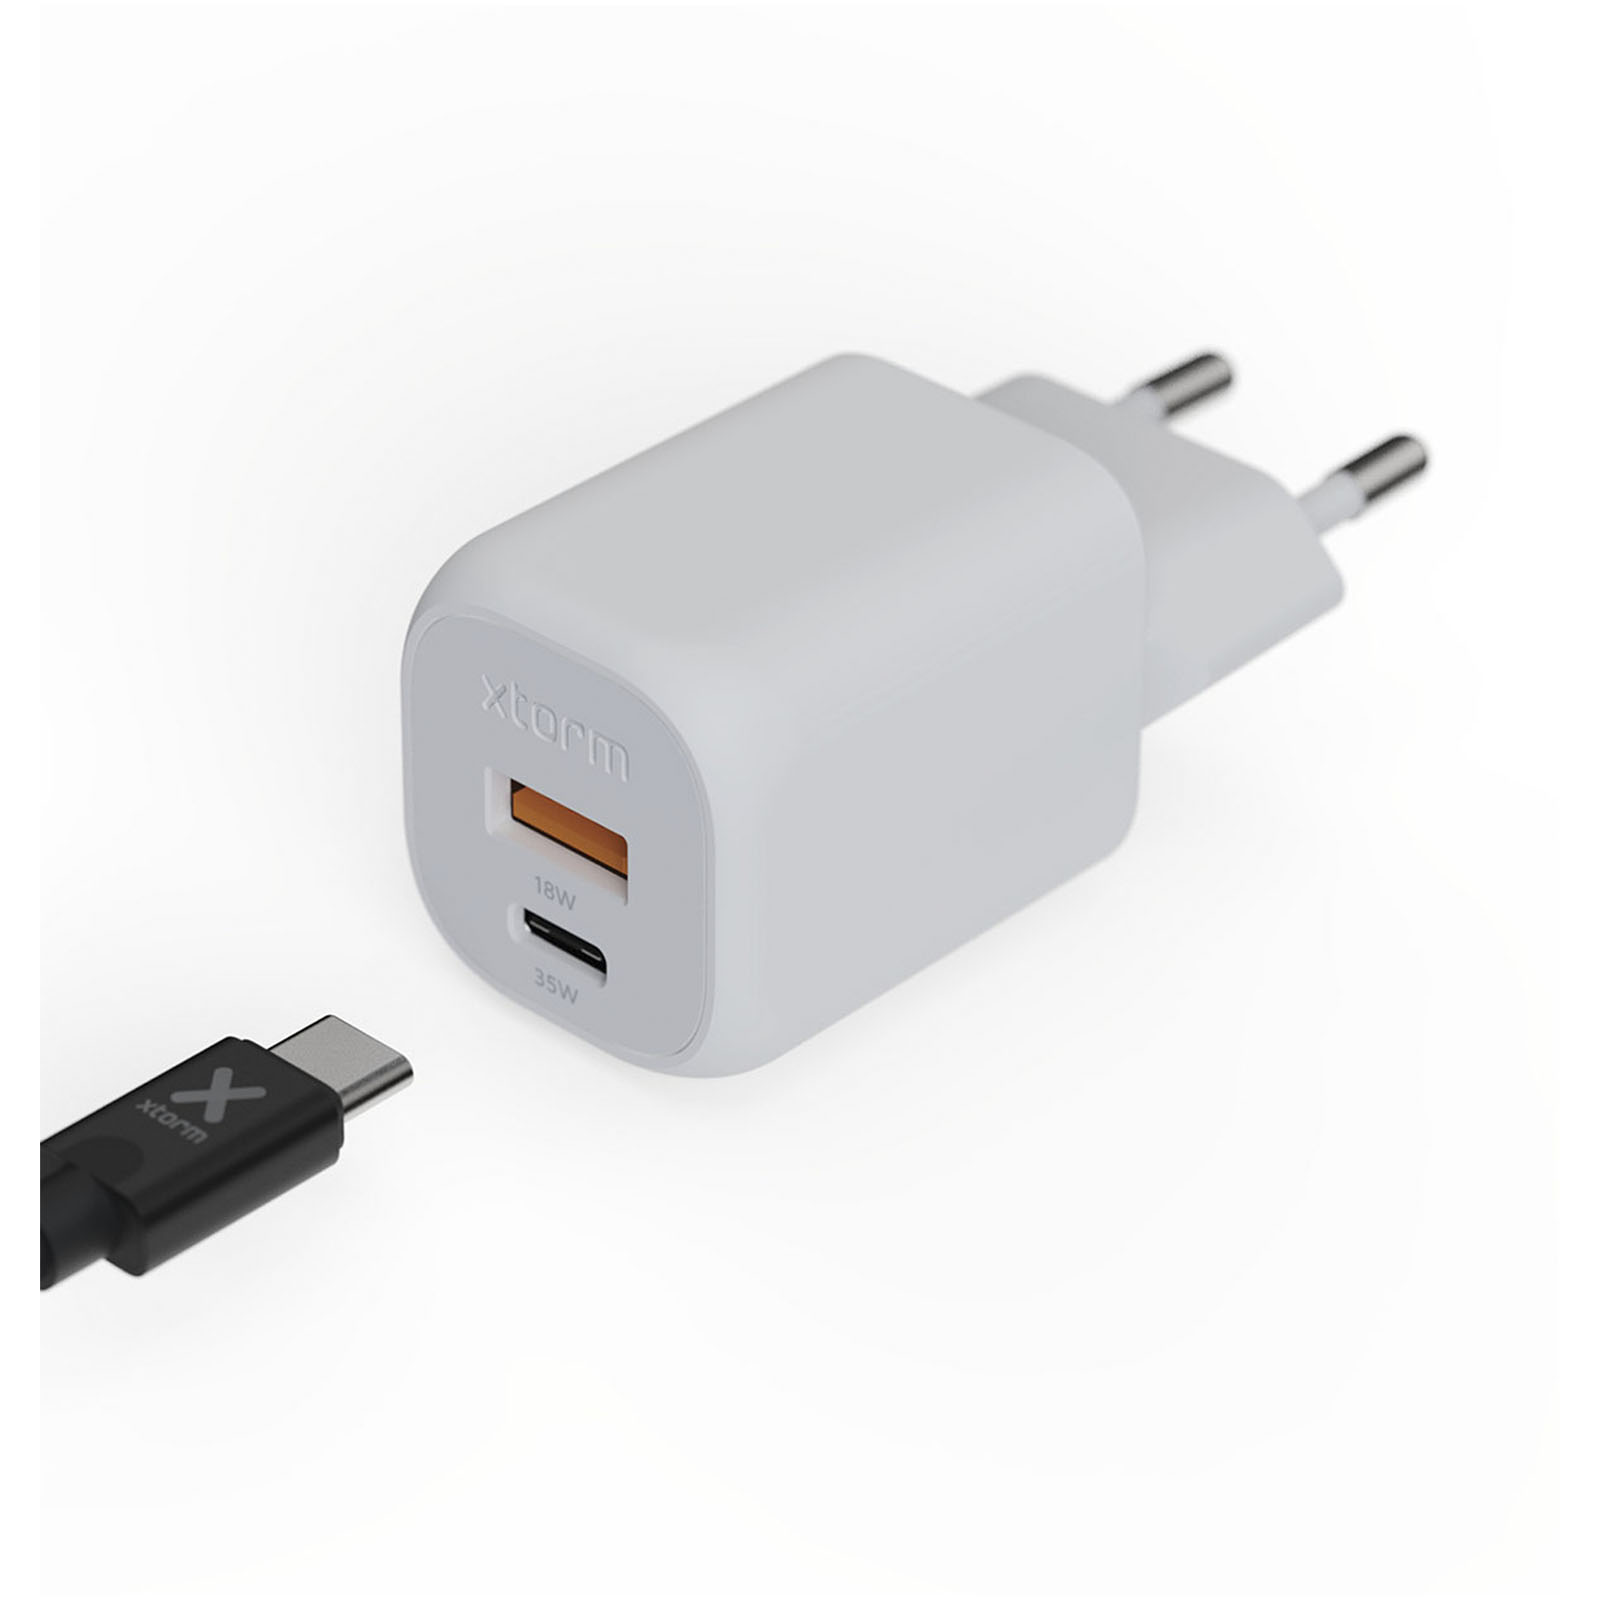 Advertising Chargers - Xtorm XEC035 GaN² Ultra 35W wall charger - 5